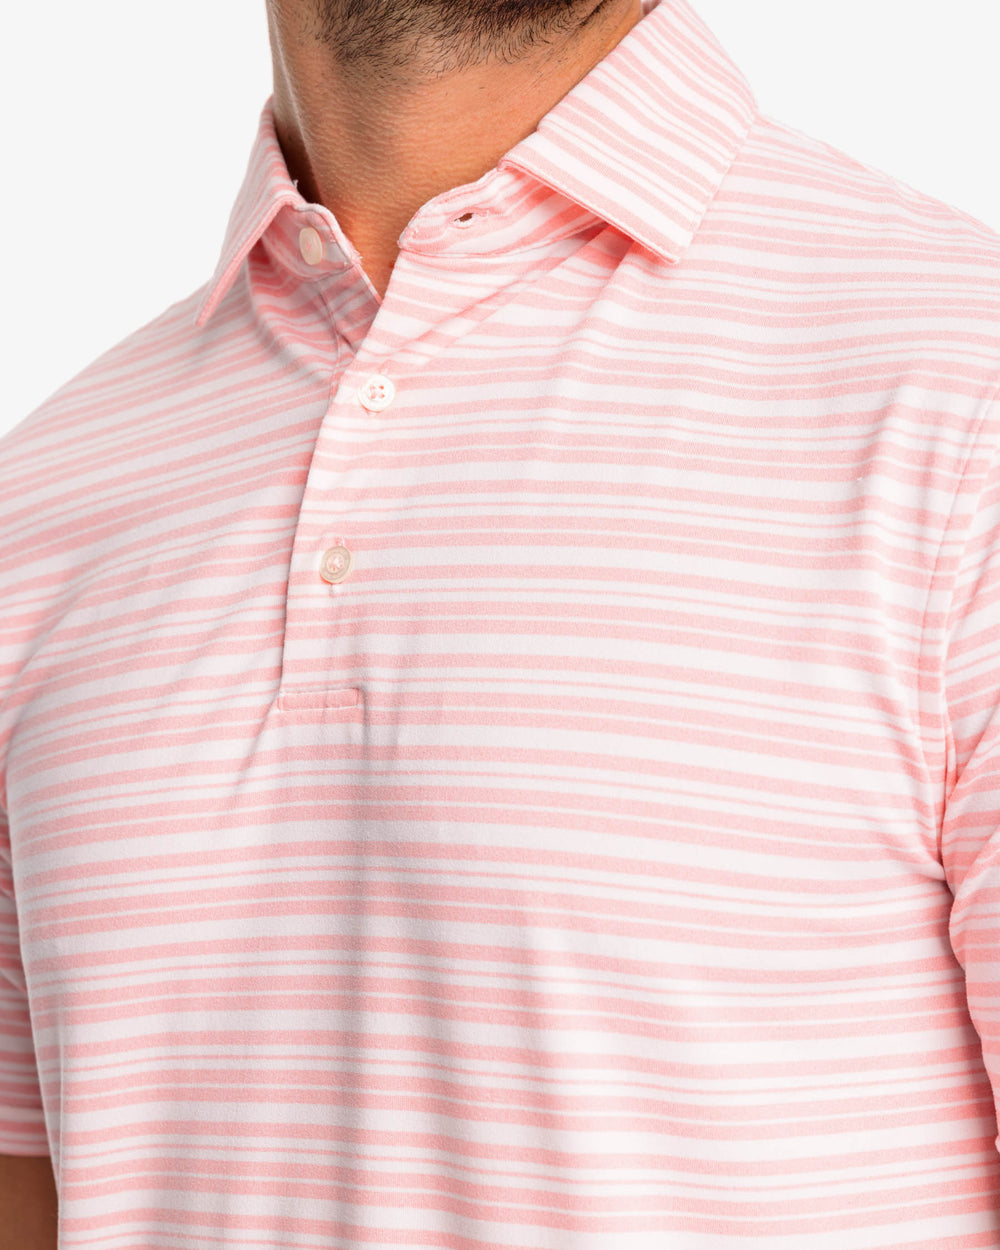 The detail view of the Southern Tide Ryder Heather Bombay Striped Polo Shirt by Southern Tide - Heather Flamingo Pink